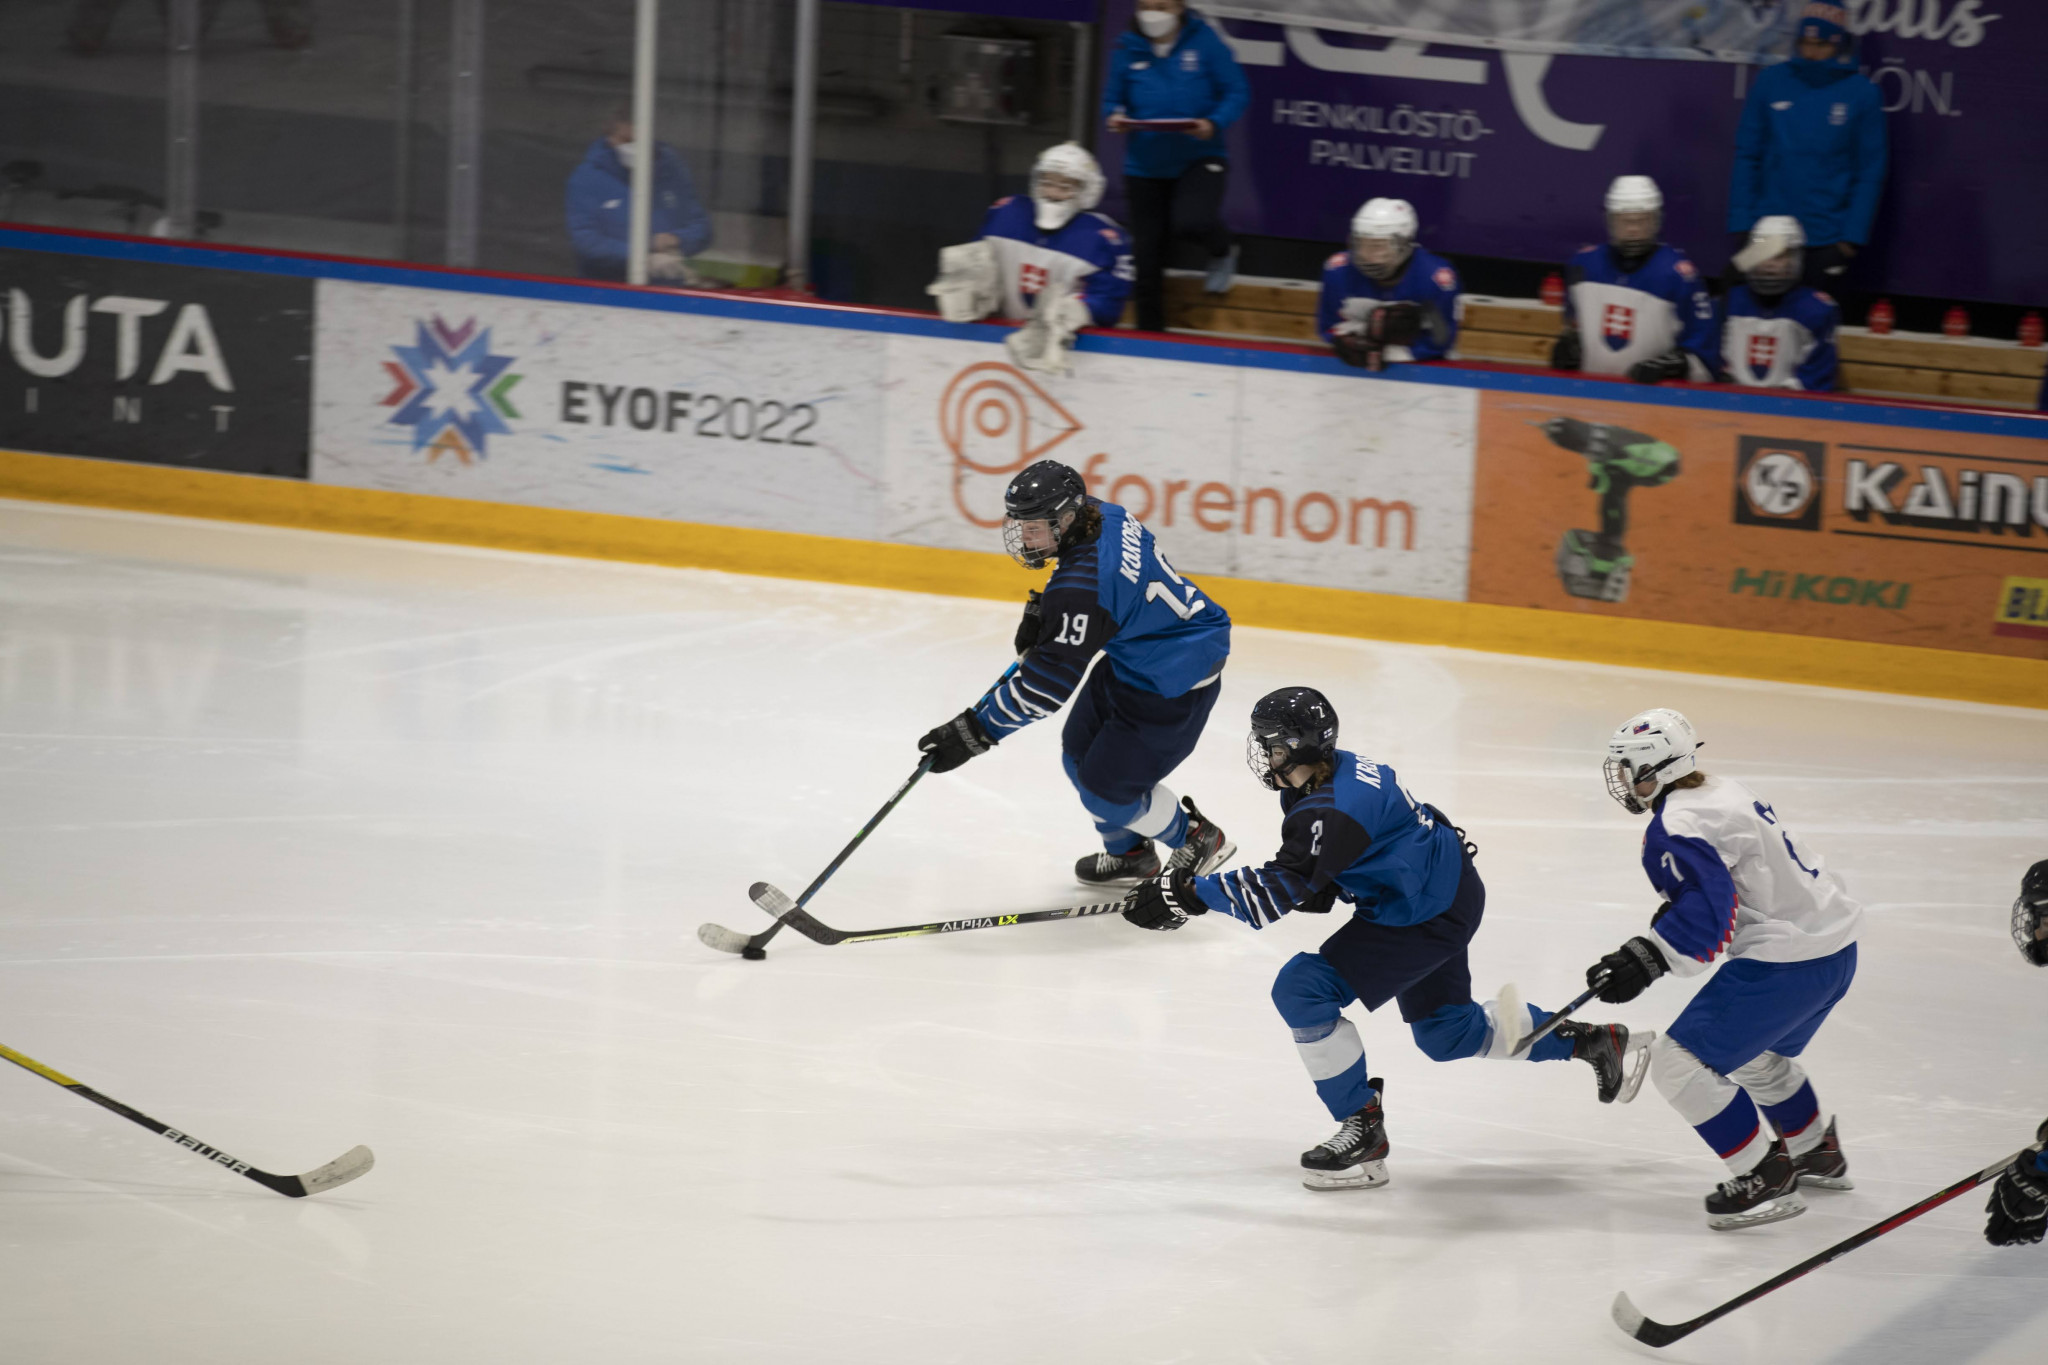 Hosts Finland start girls' ice hockey tournament at home Winter EYOF with win